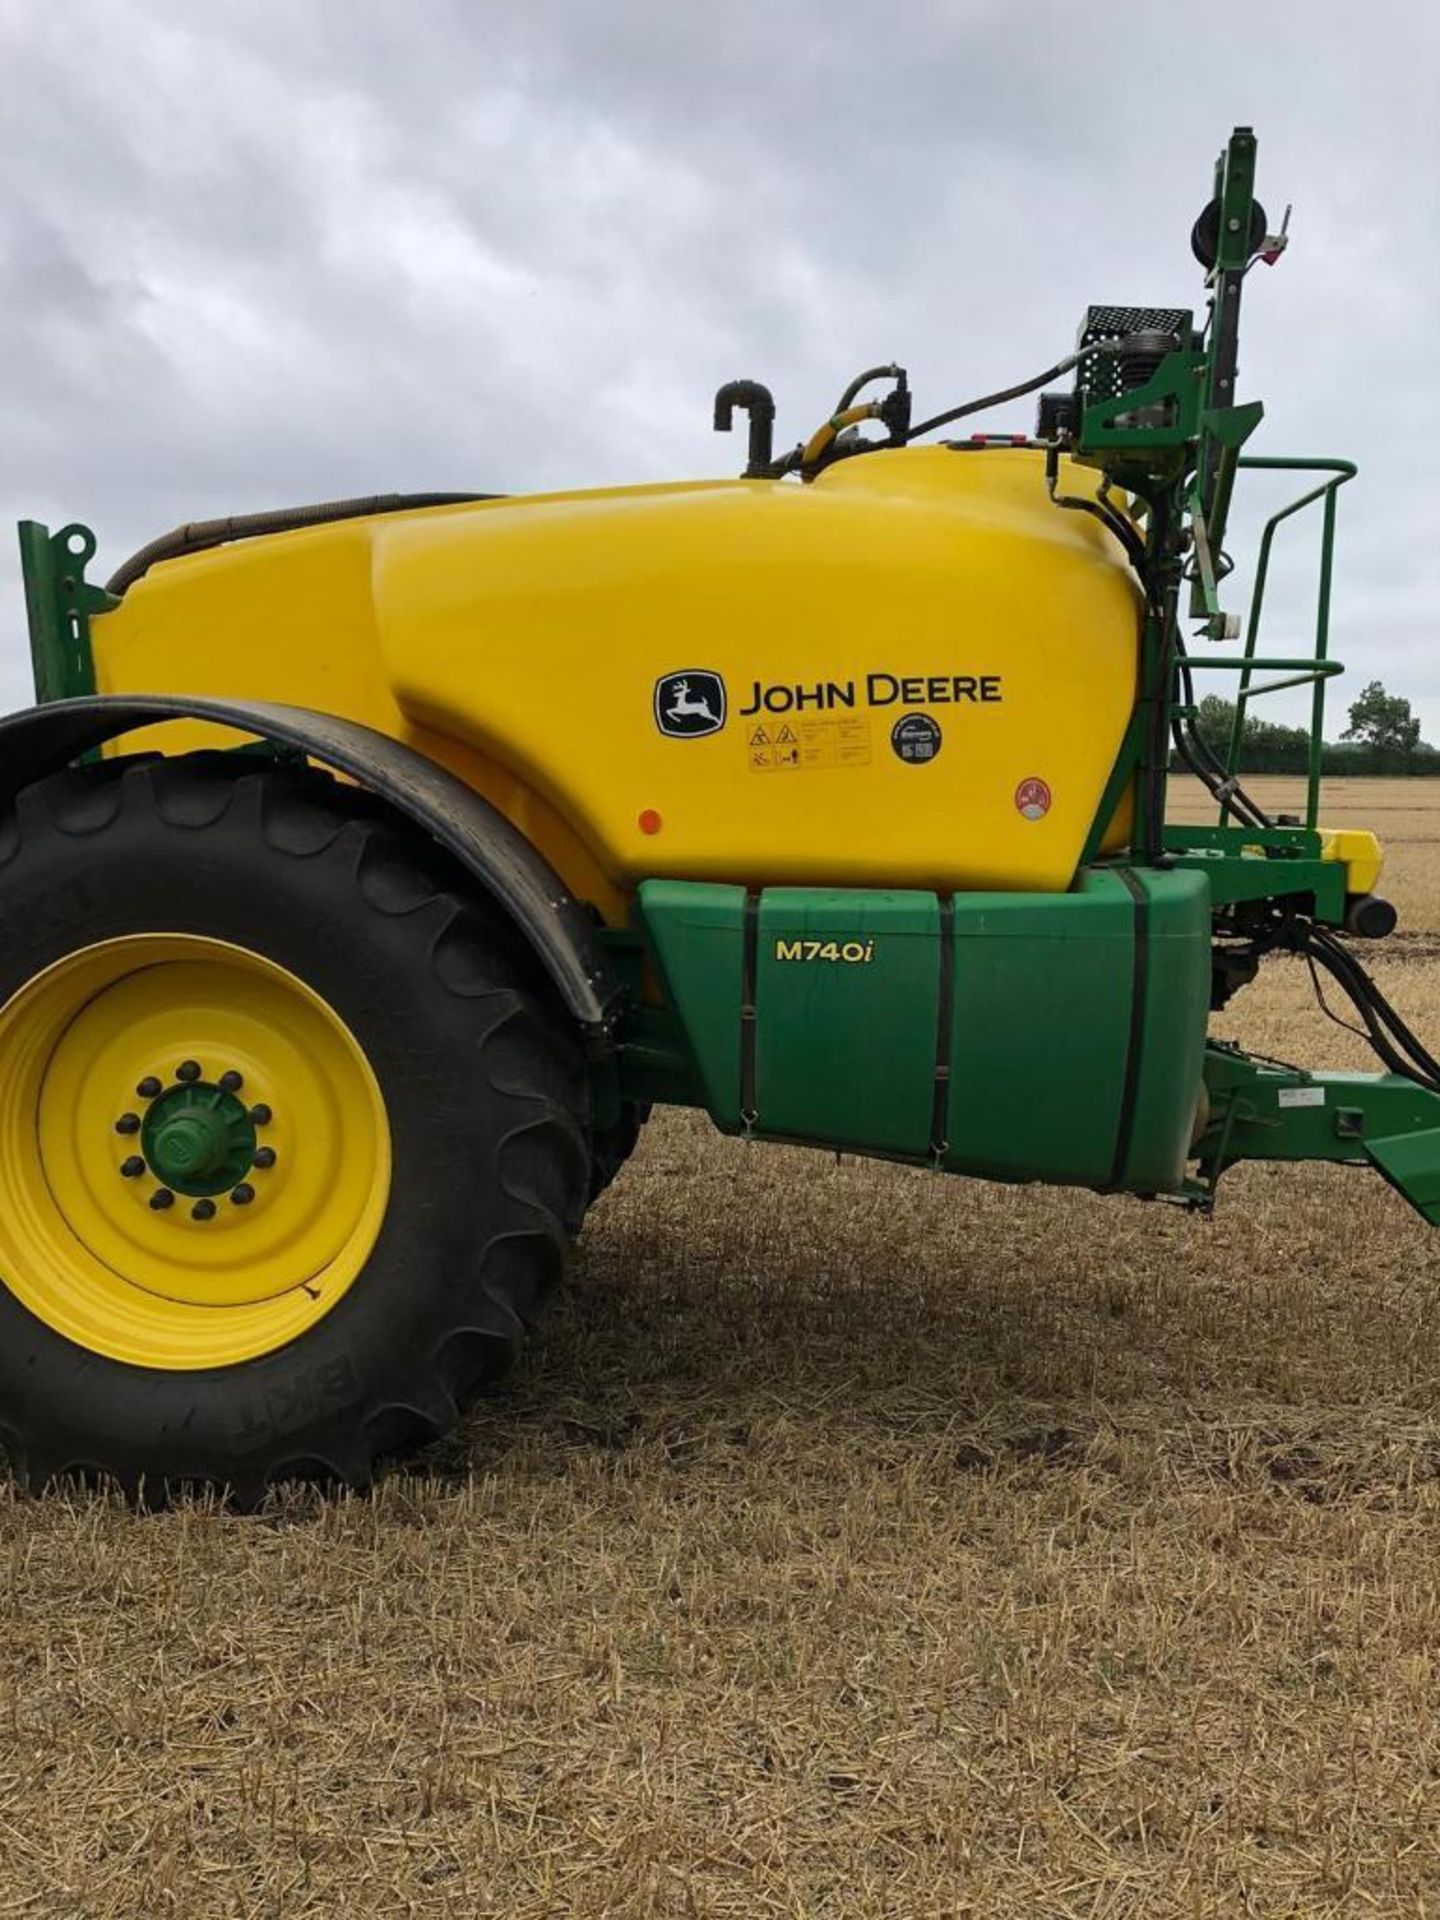 2017 John Deere M740i 24m trailed sprayer, 4000l tank on 520/85R38 wheels and tyres. Hectares: c.12, - Image 10 of 14